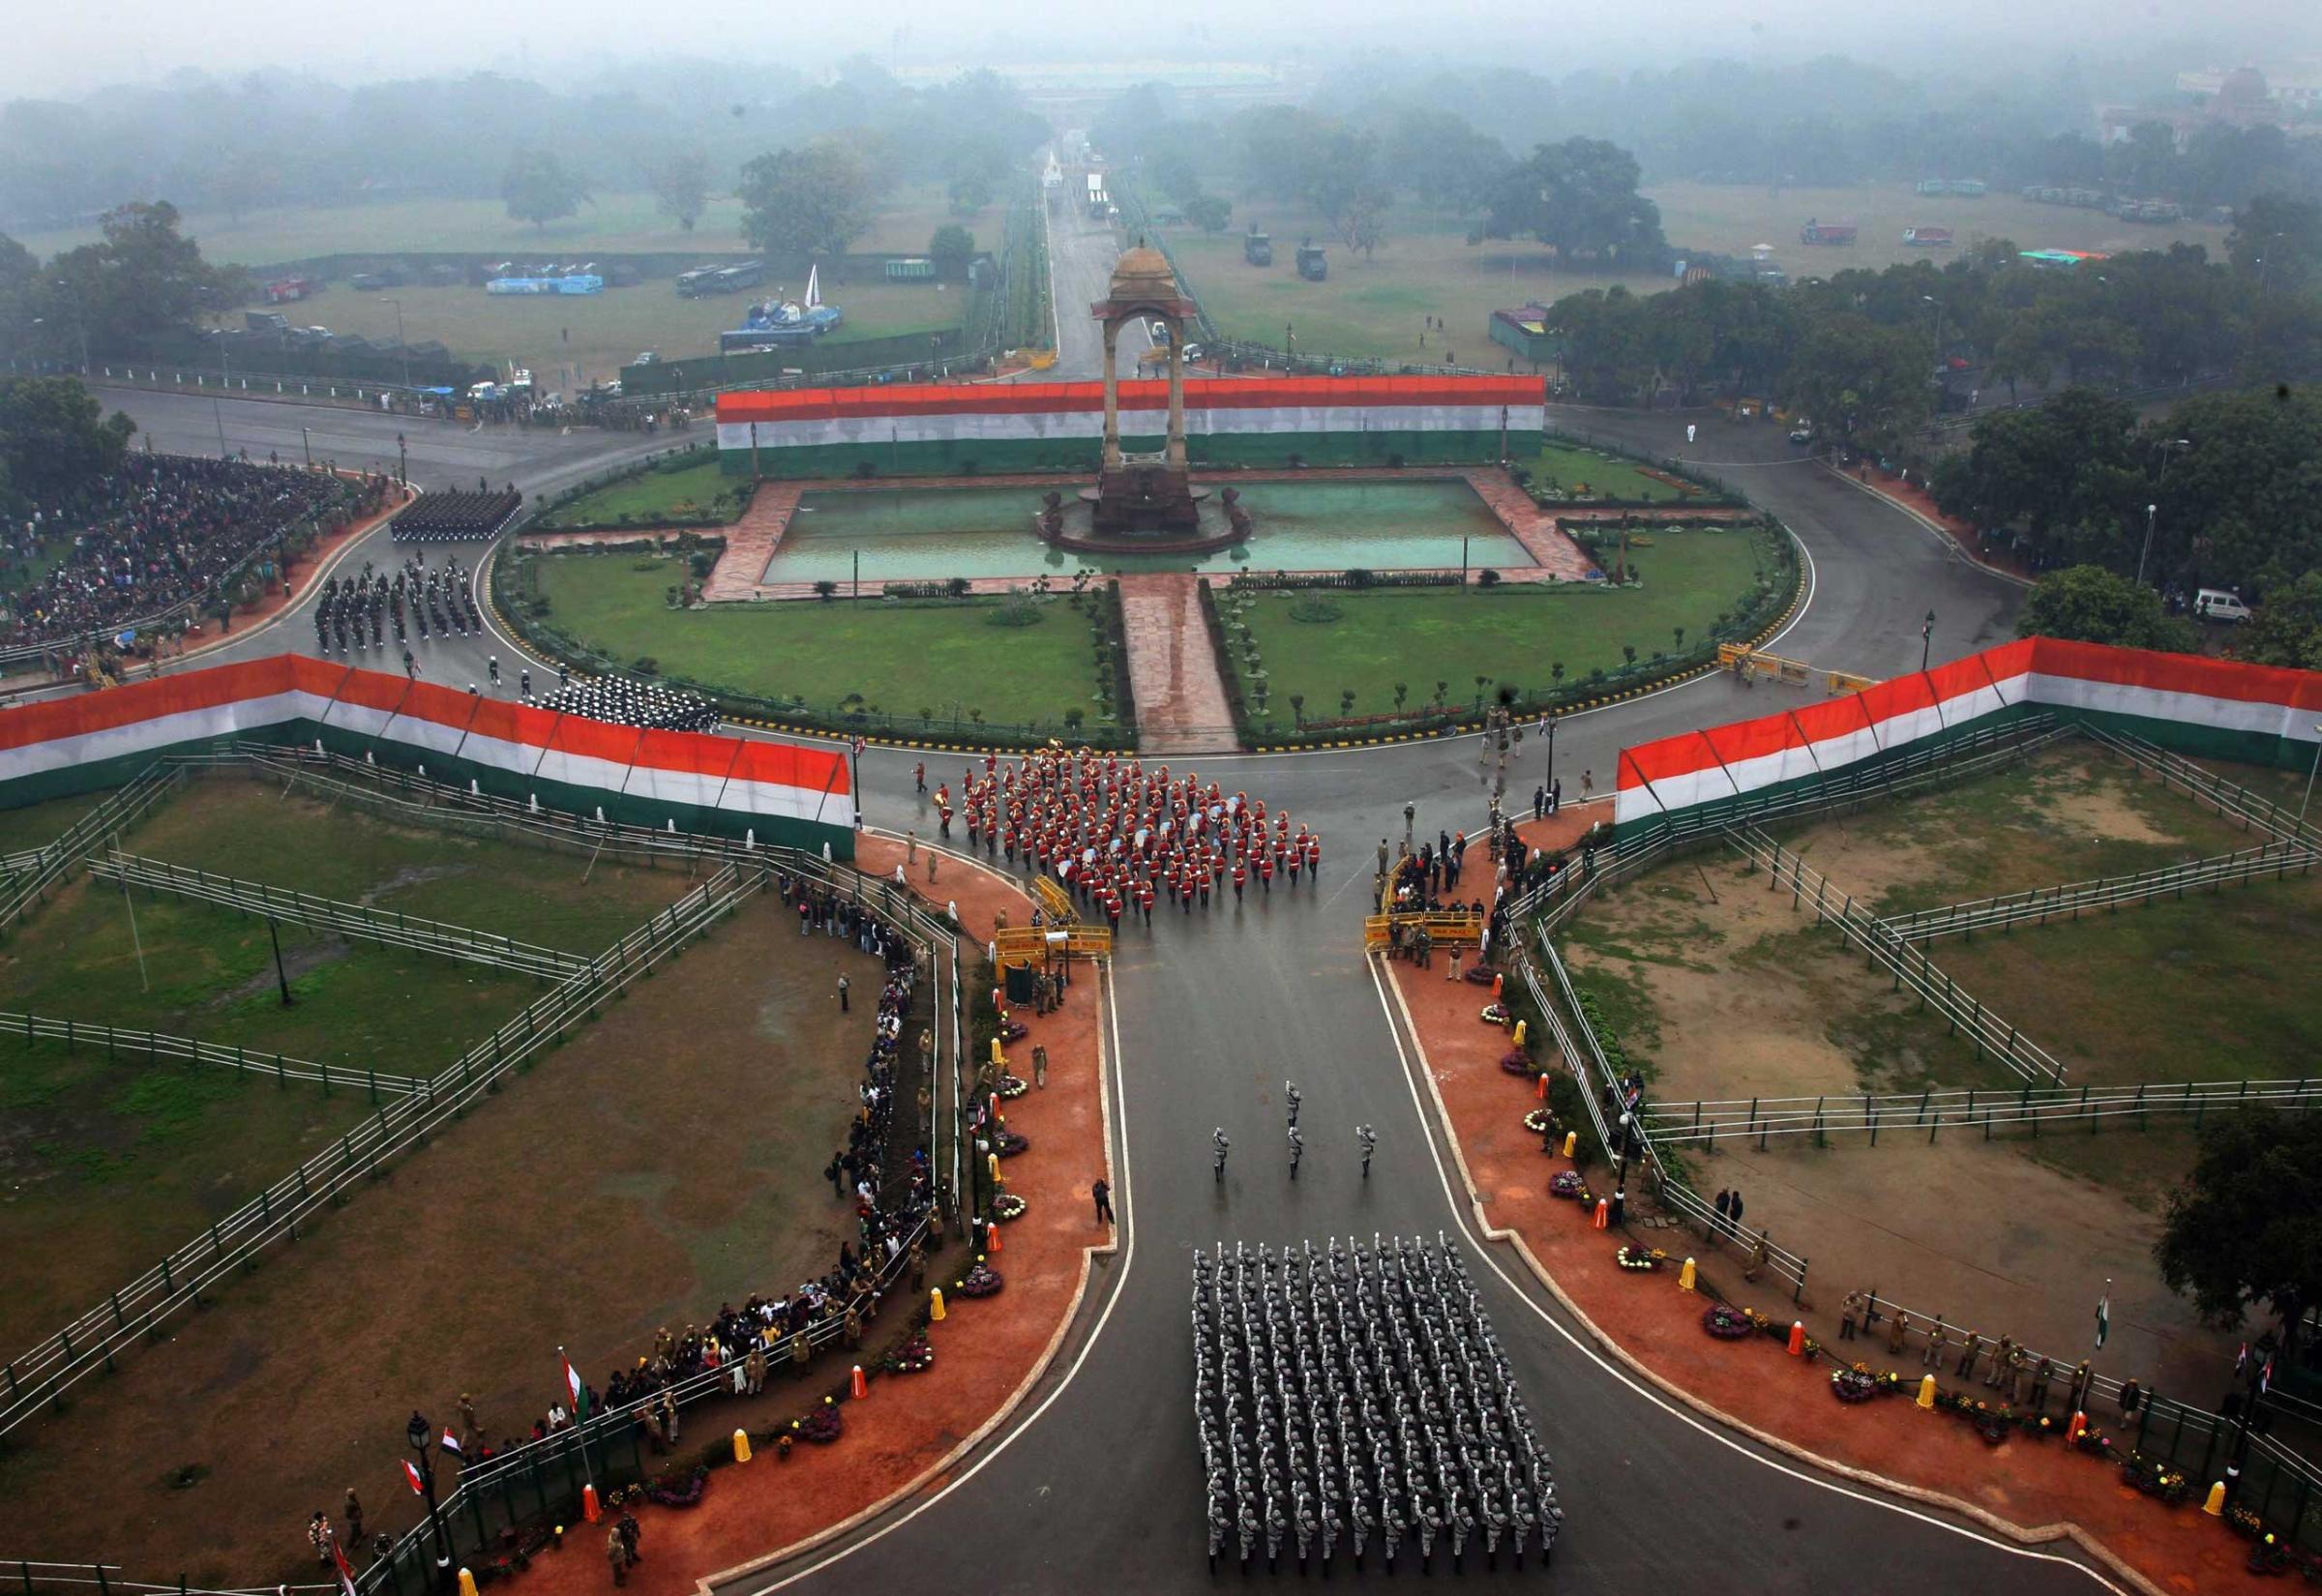 Aaerial view of the Indian paramilitary contingents taking part in India's Republic Day parade in New Delhi, Jan. 26, 2015.